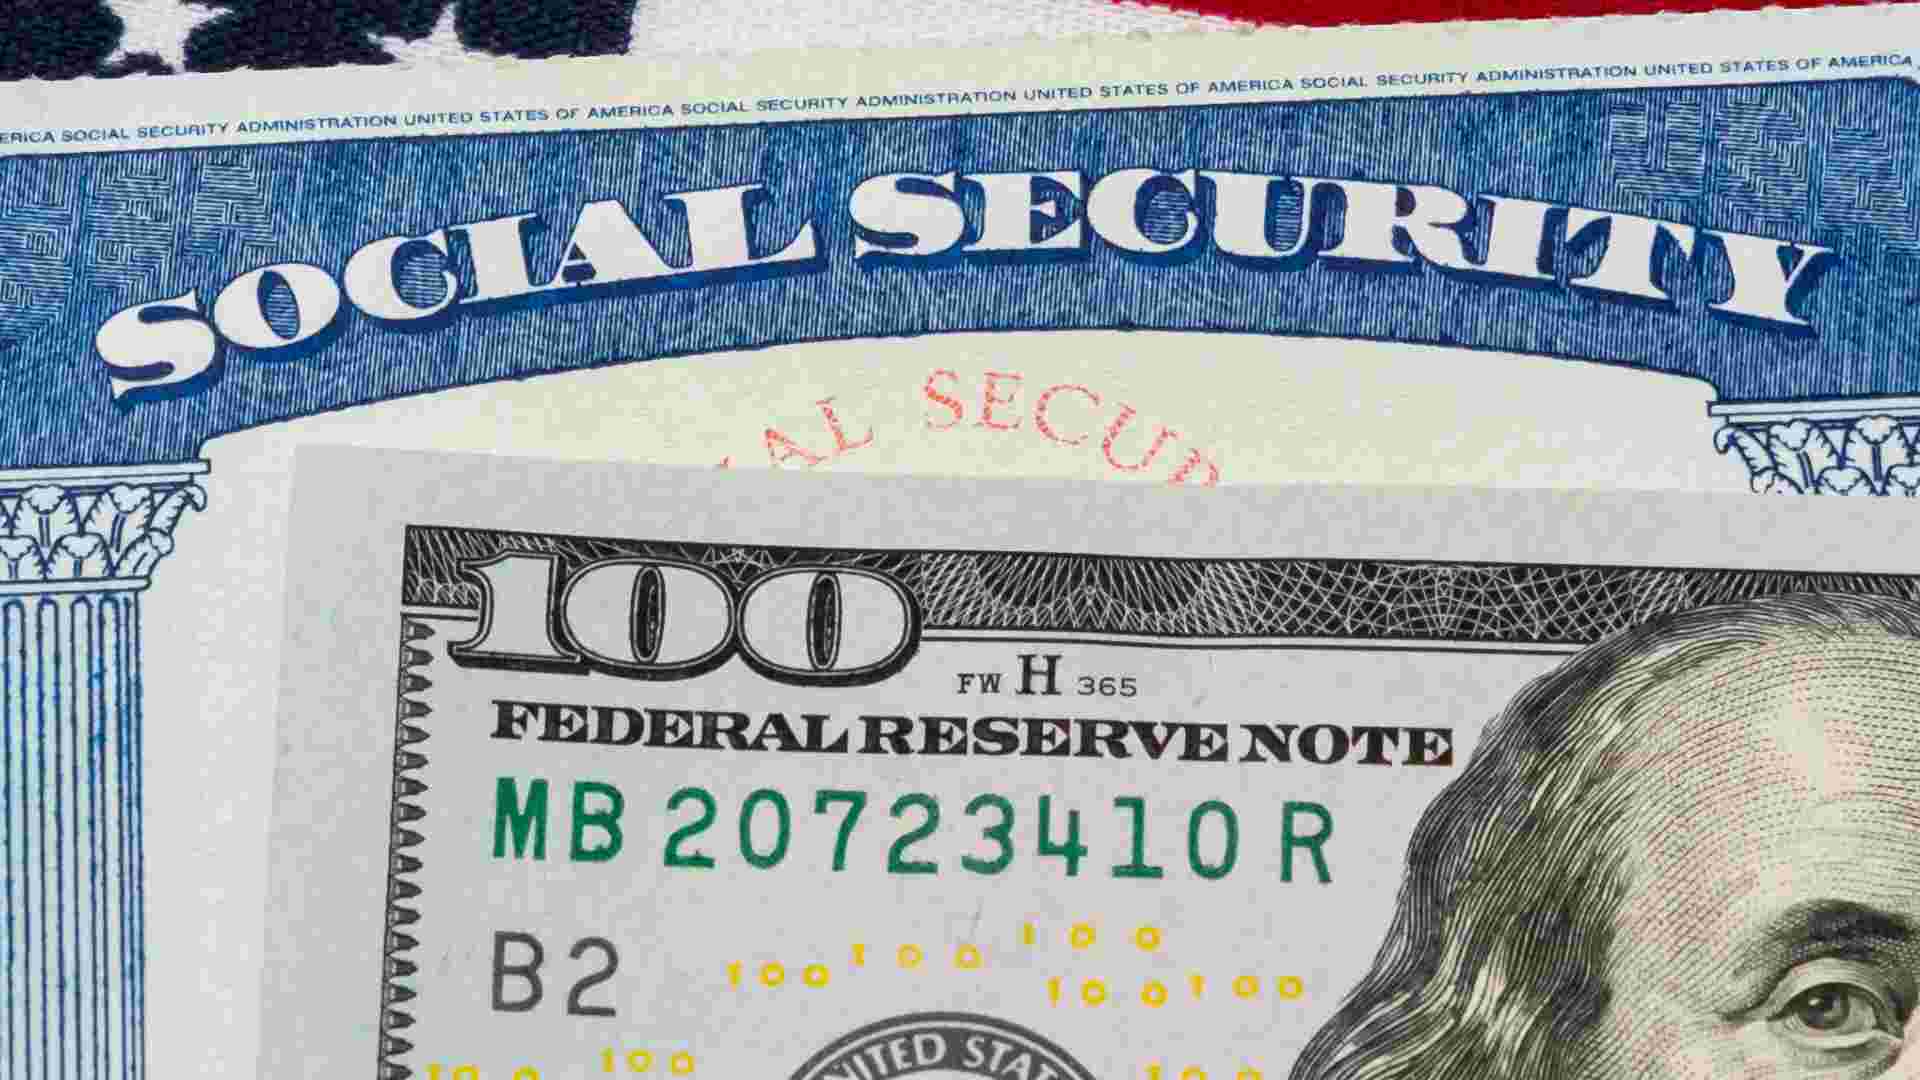 Most Americans will need to have worked for at least a minimum number of years to qualify for Social Security payments